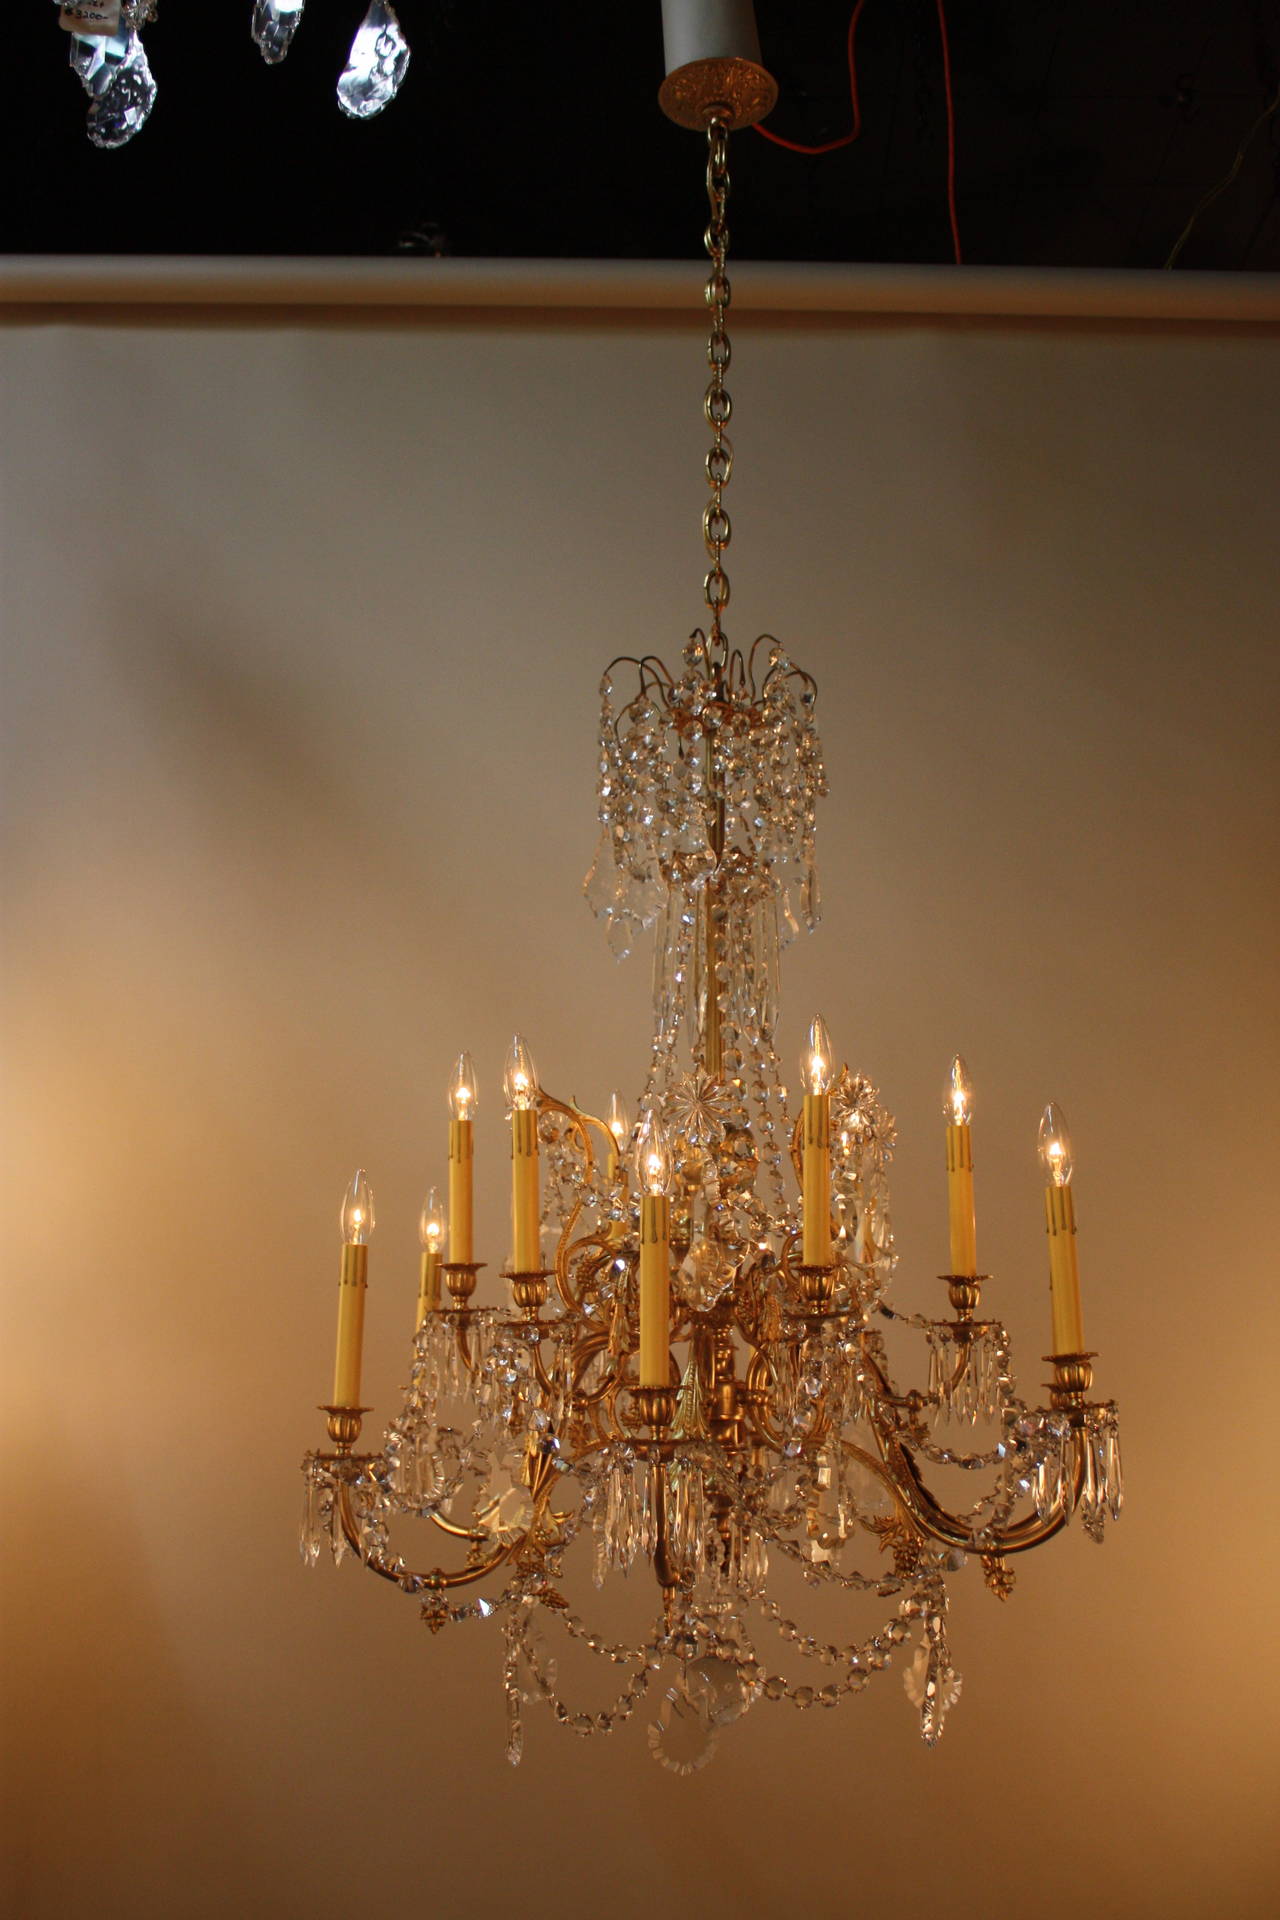 Wonderful electrified and modified twelve-light 19th century French gas chandelier.